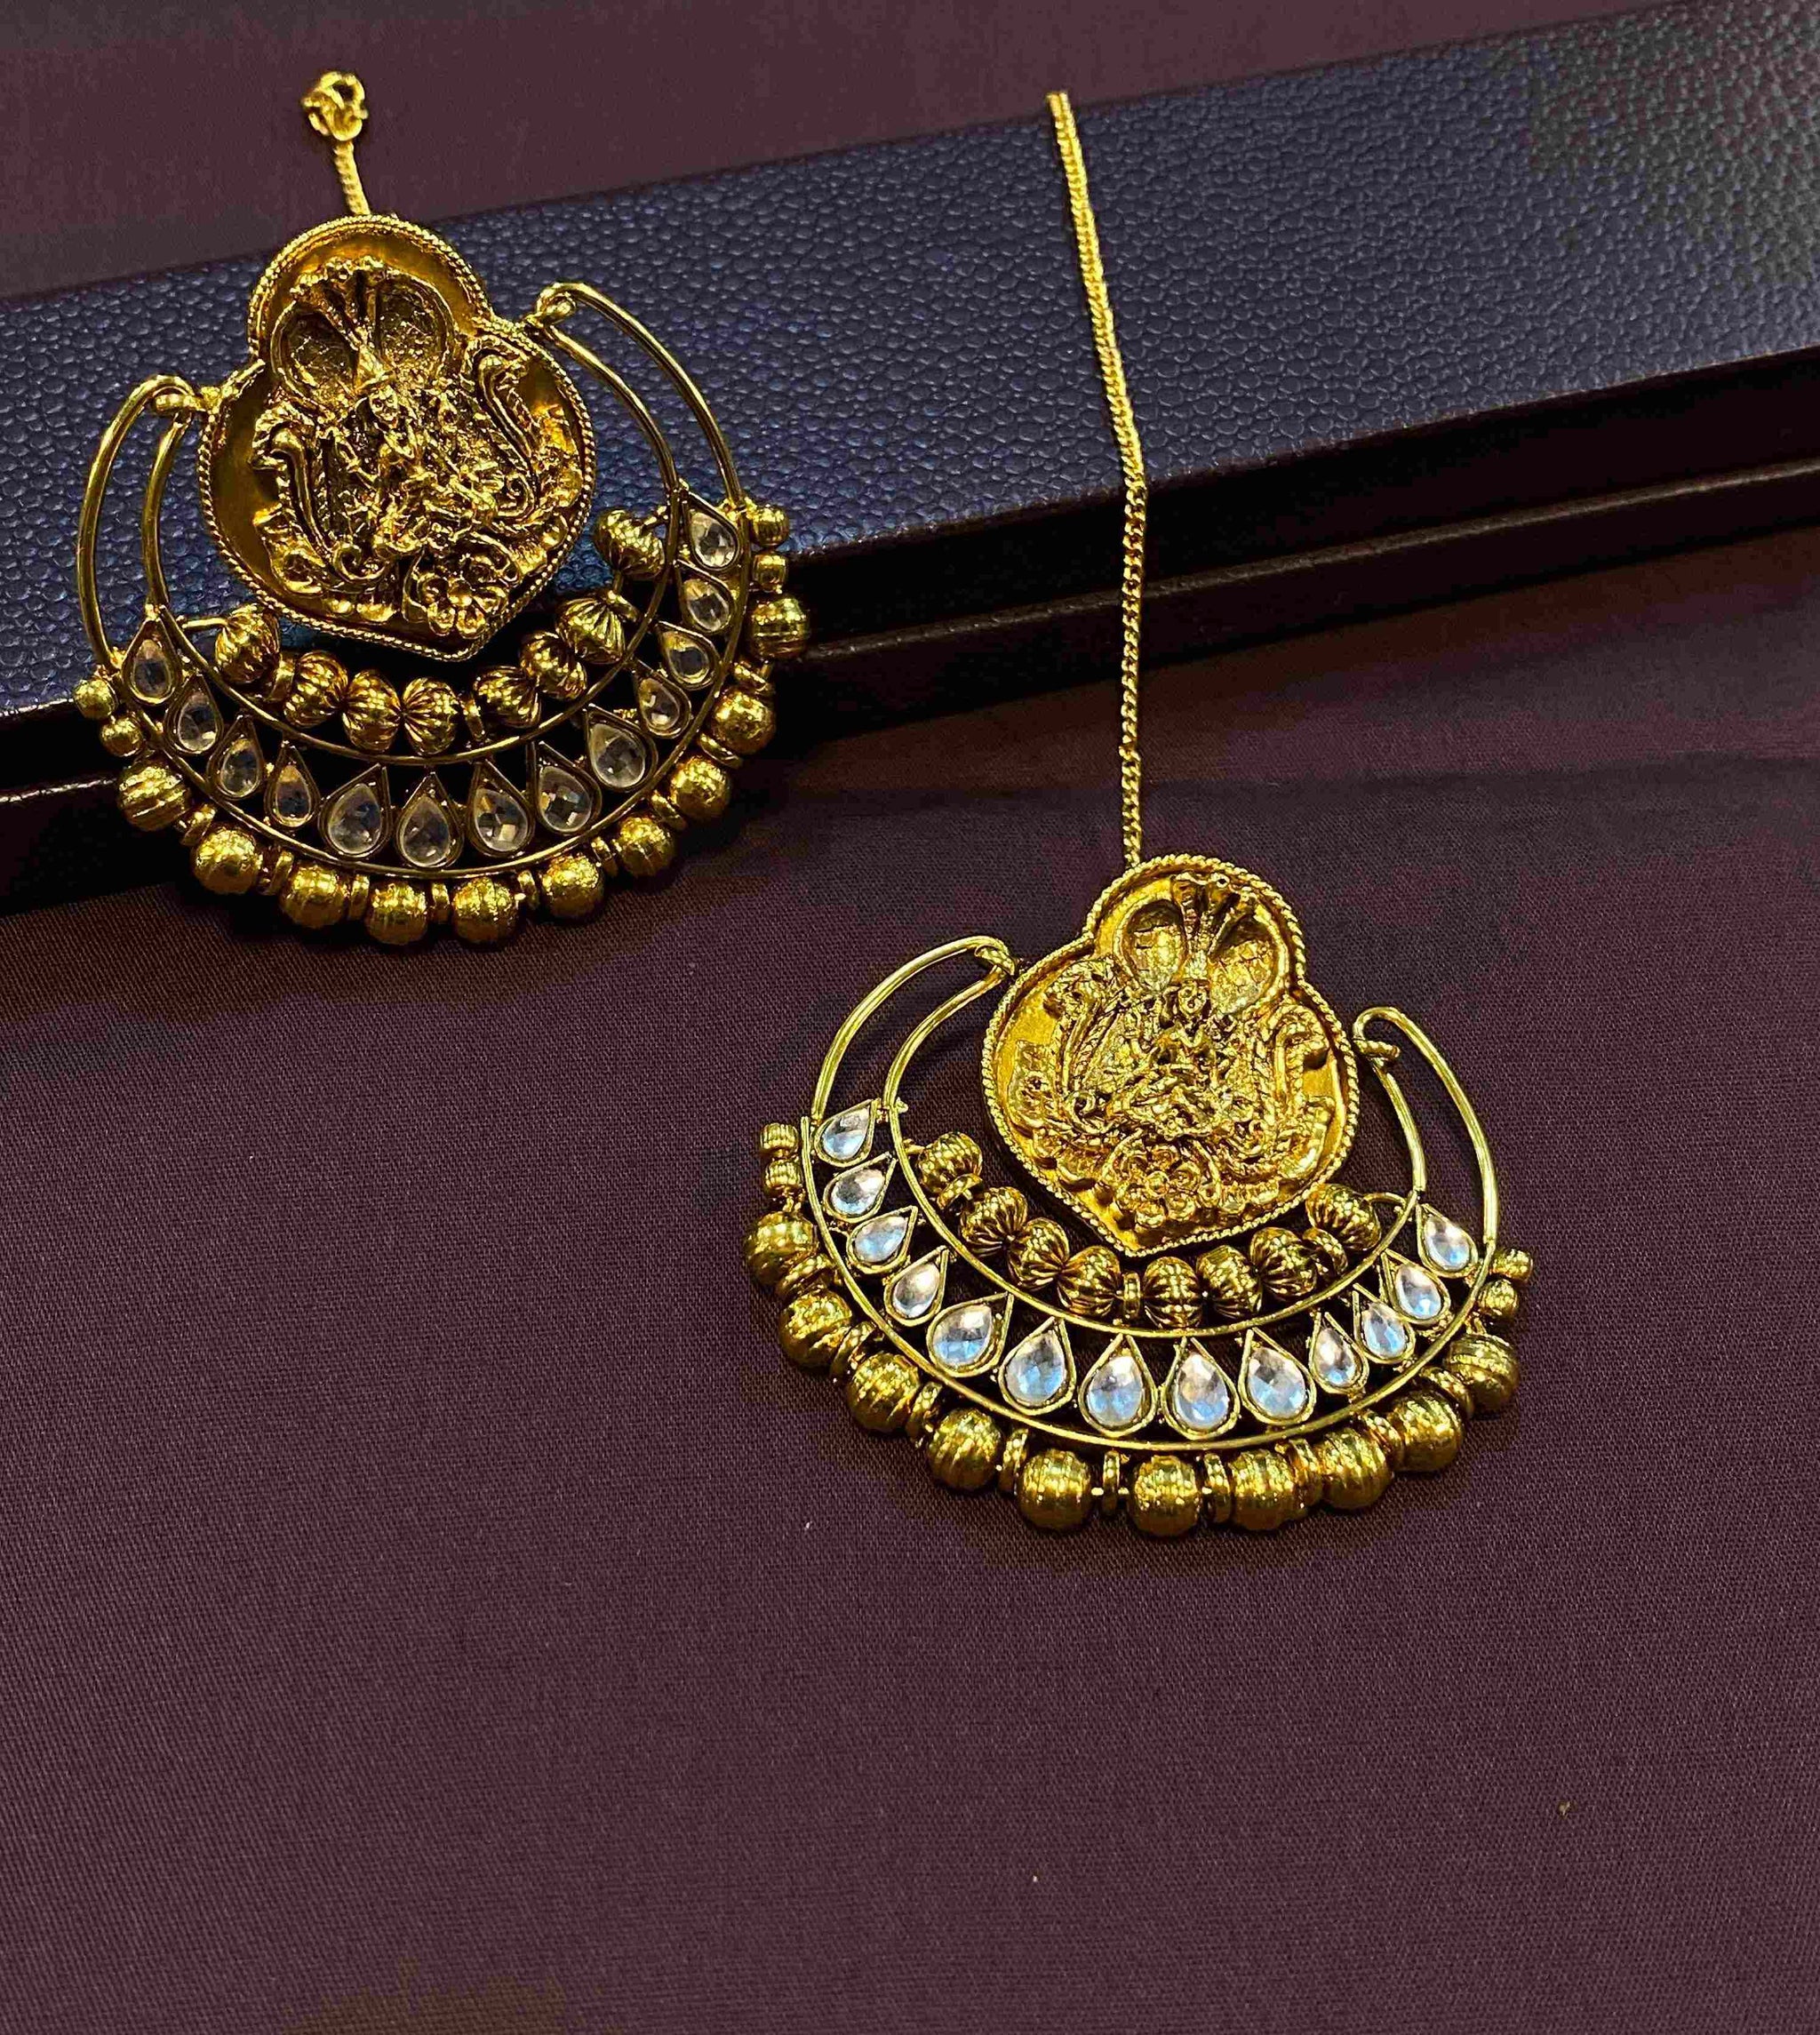 Indian Earrings Antique Gold Jhumka South Indian Wedding Bridal Earrings  Jewelry | eBay